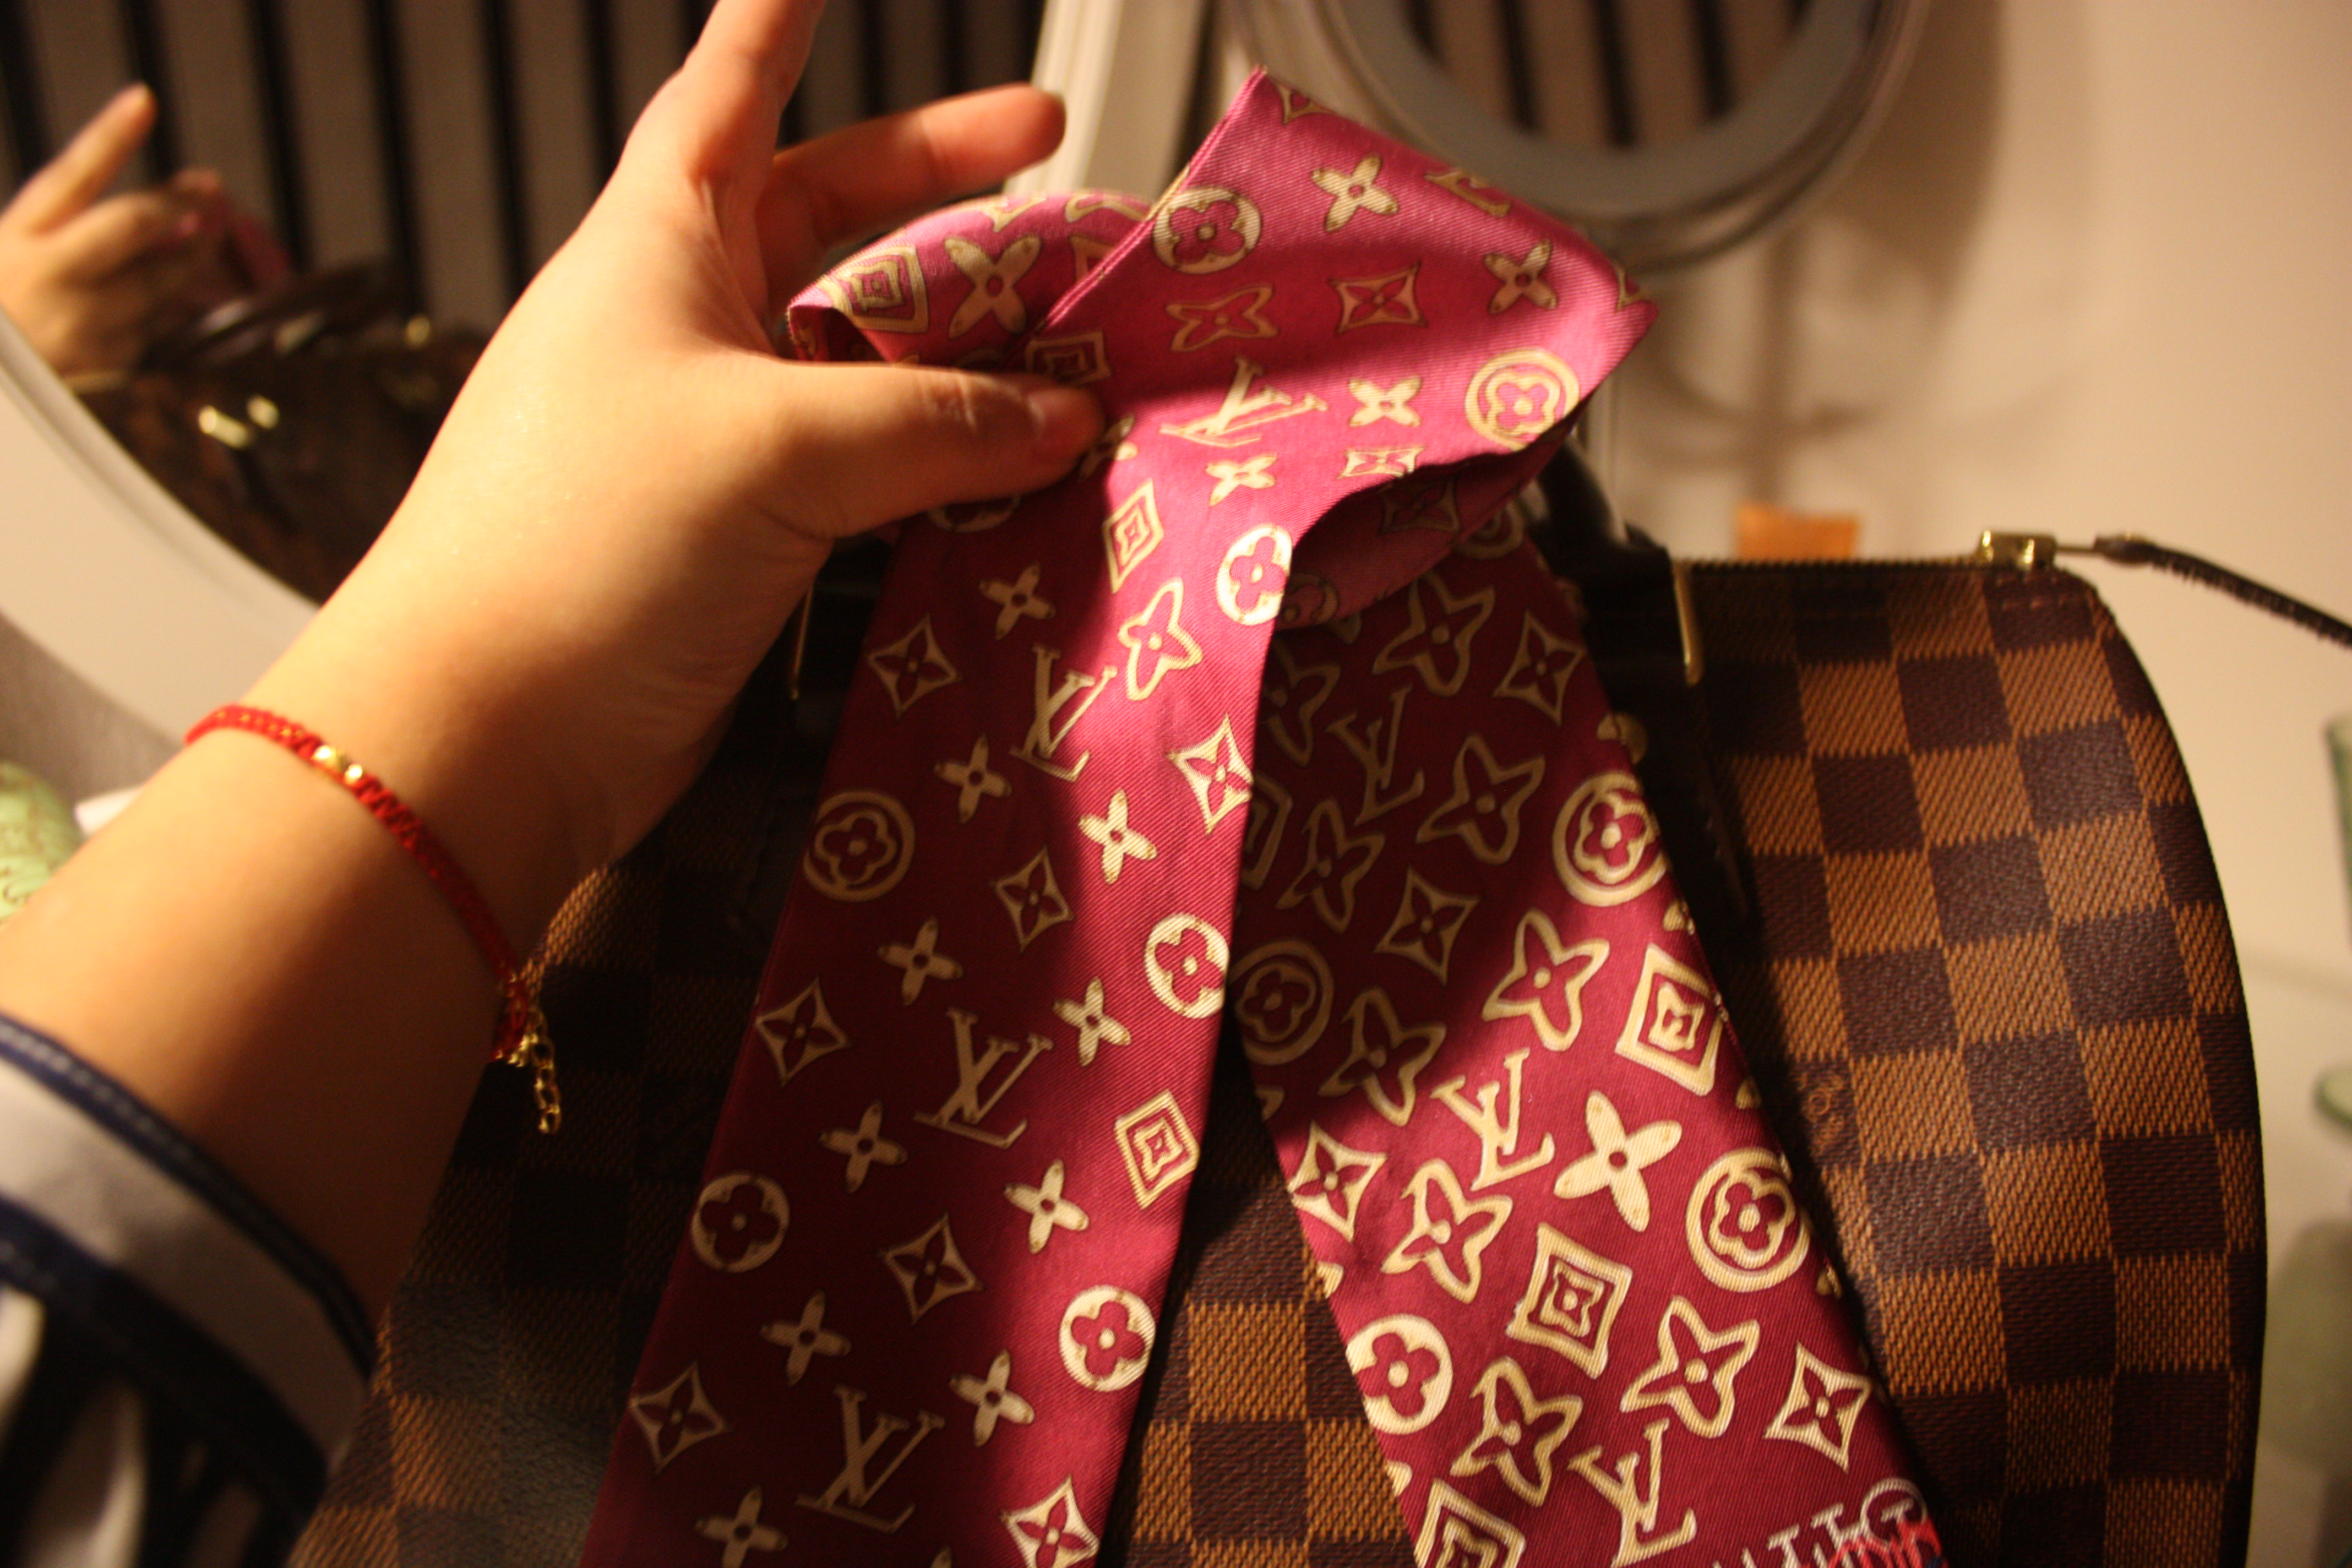 1 way to use a bag scarf. Isn't it lovely? #bagscarf #xaricollections